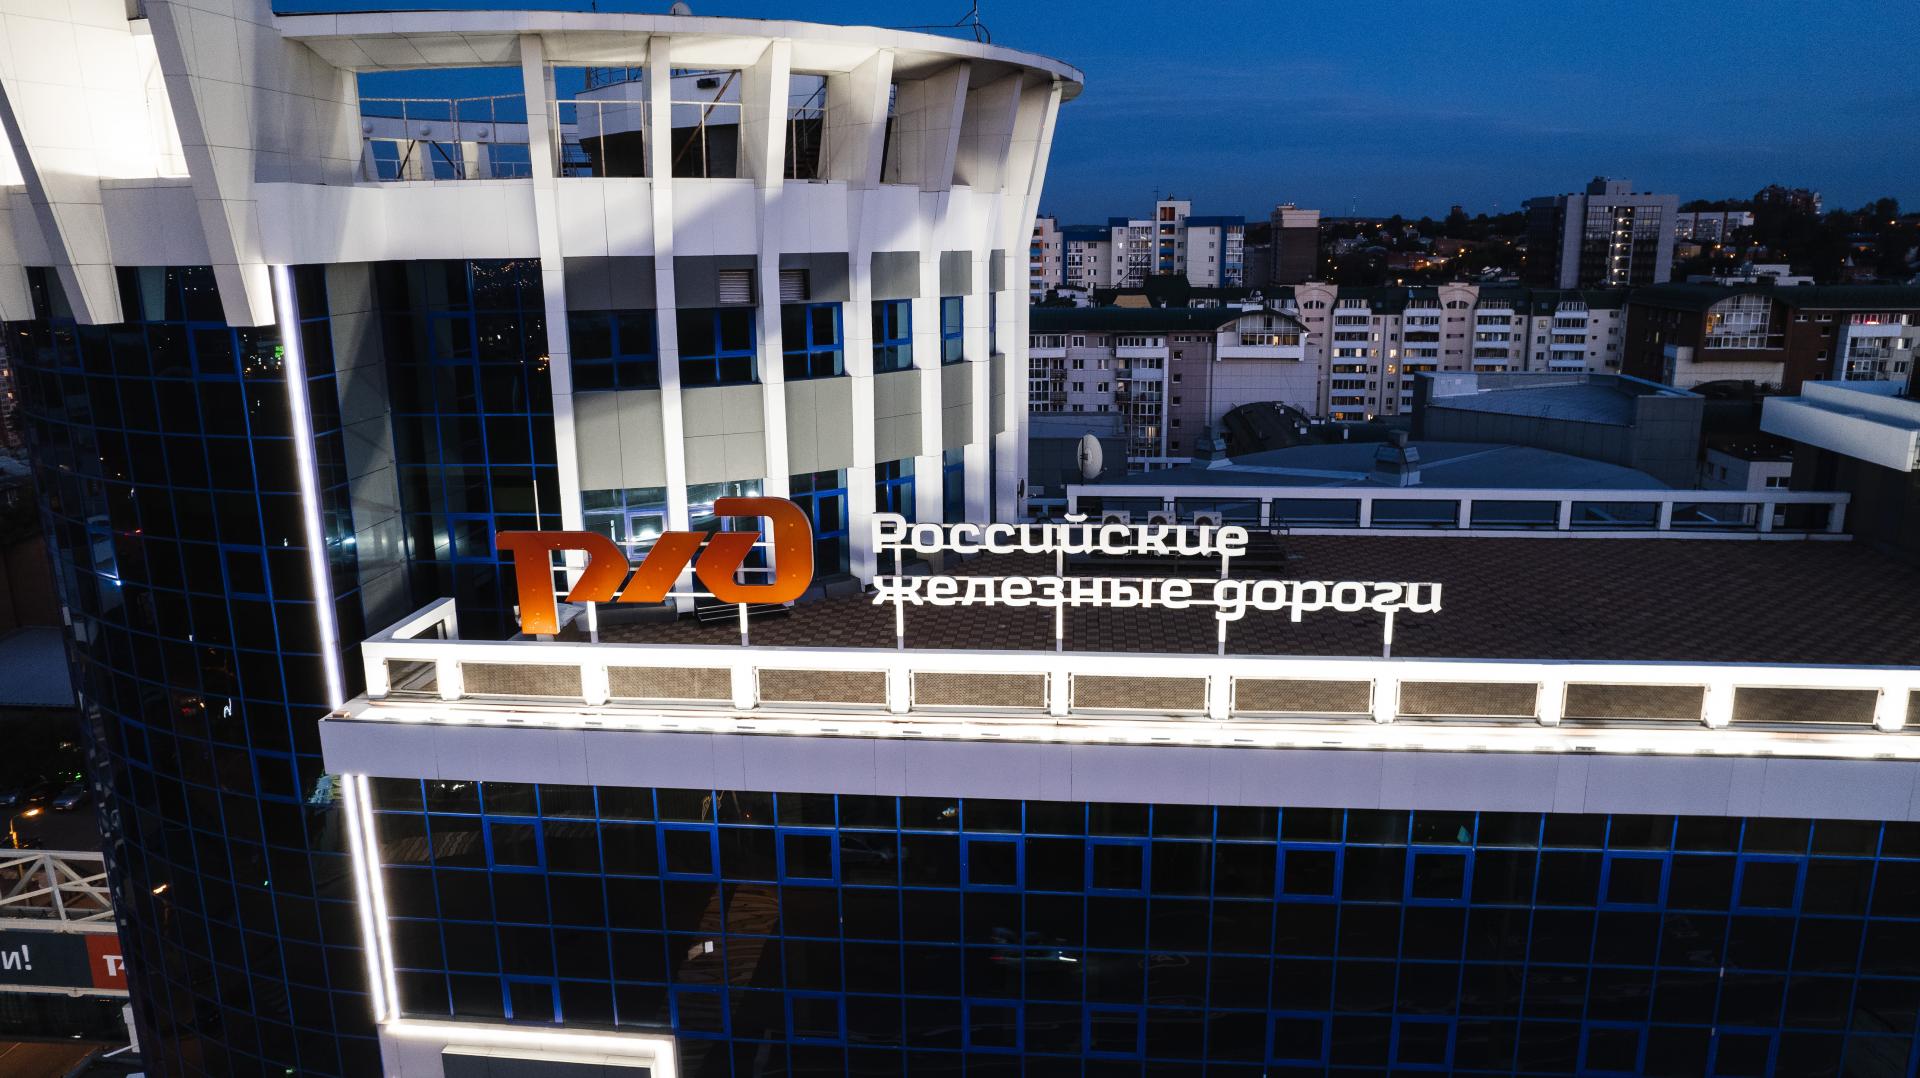 Russian Railways Central Office